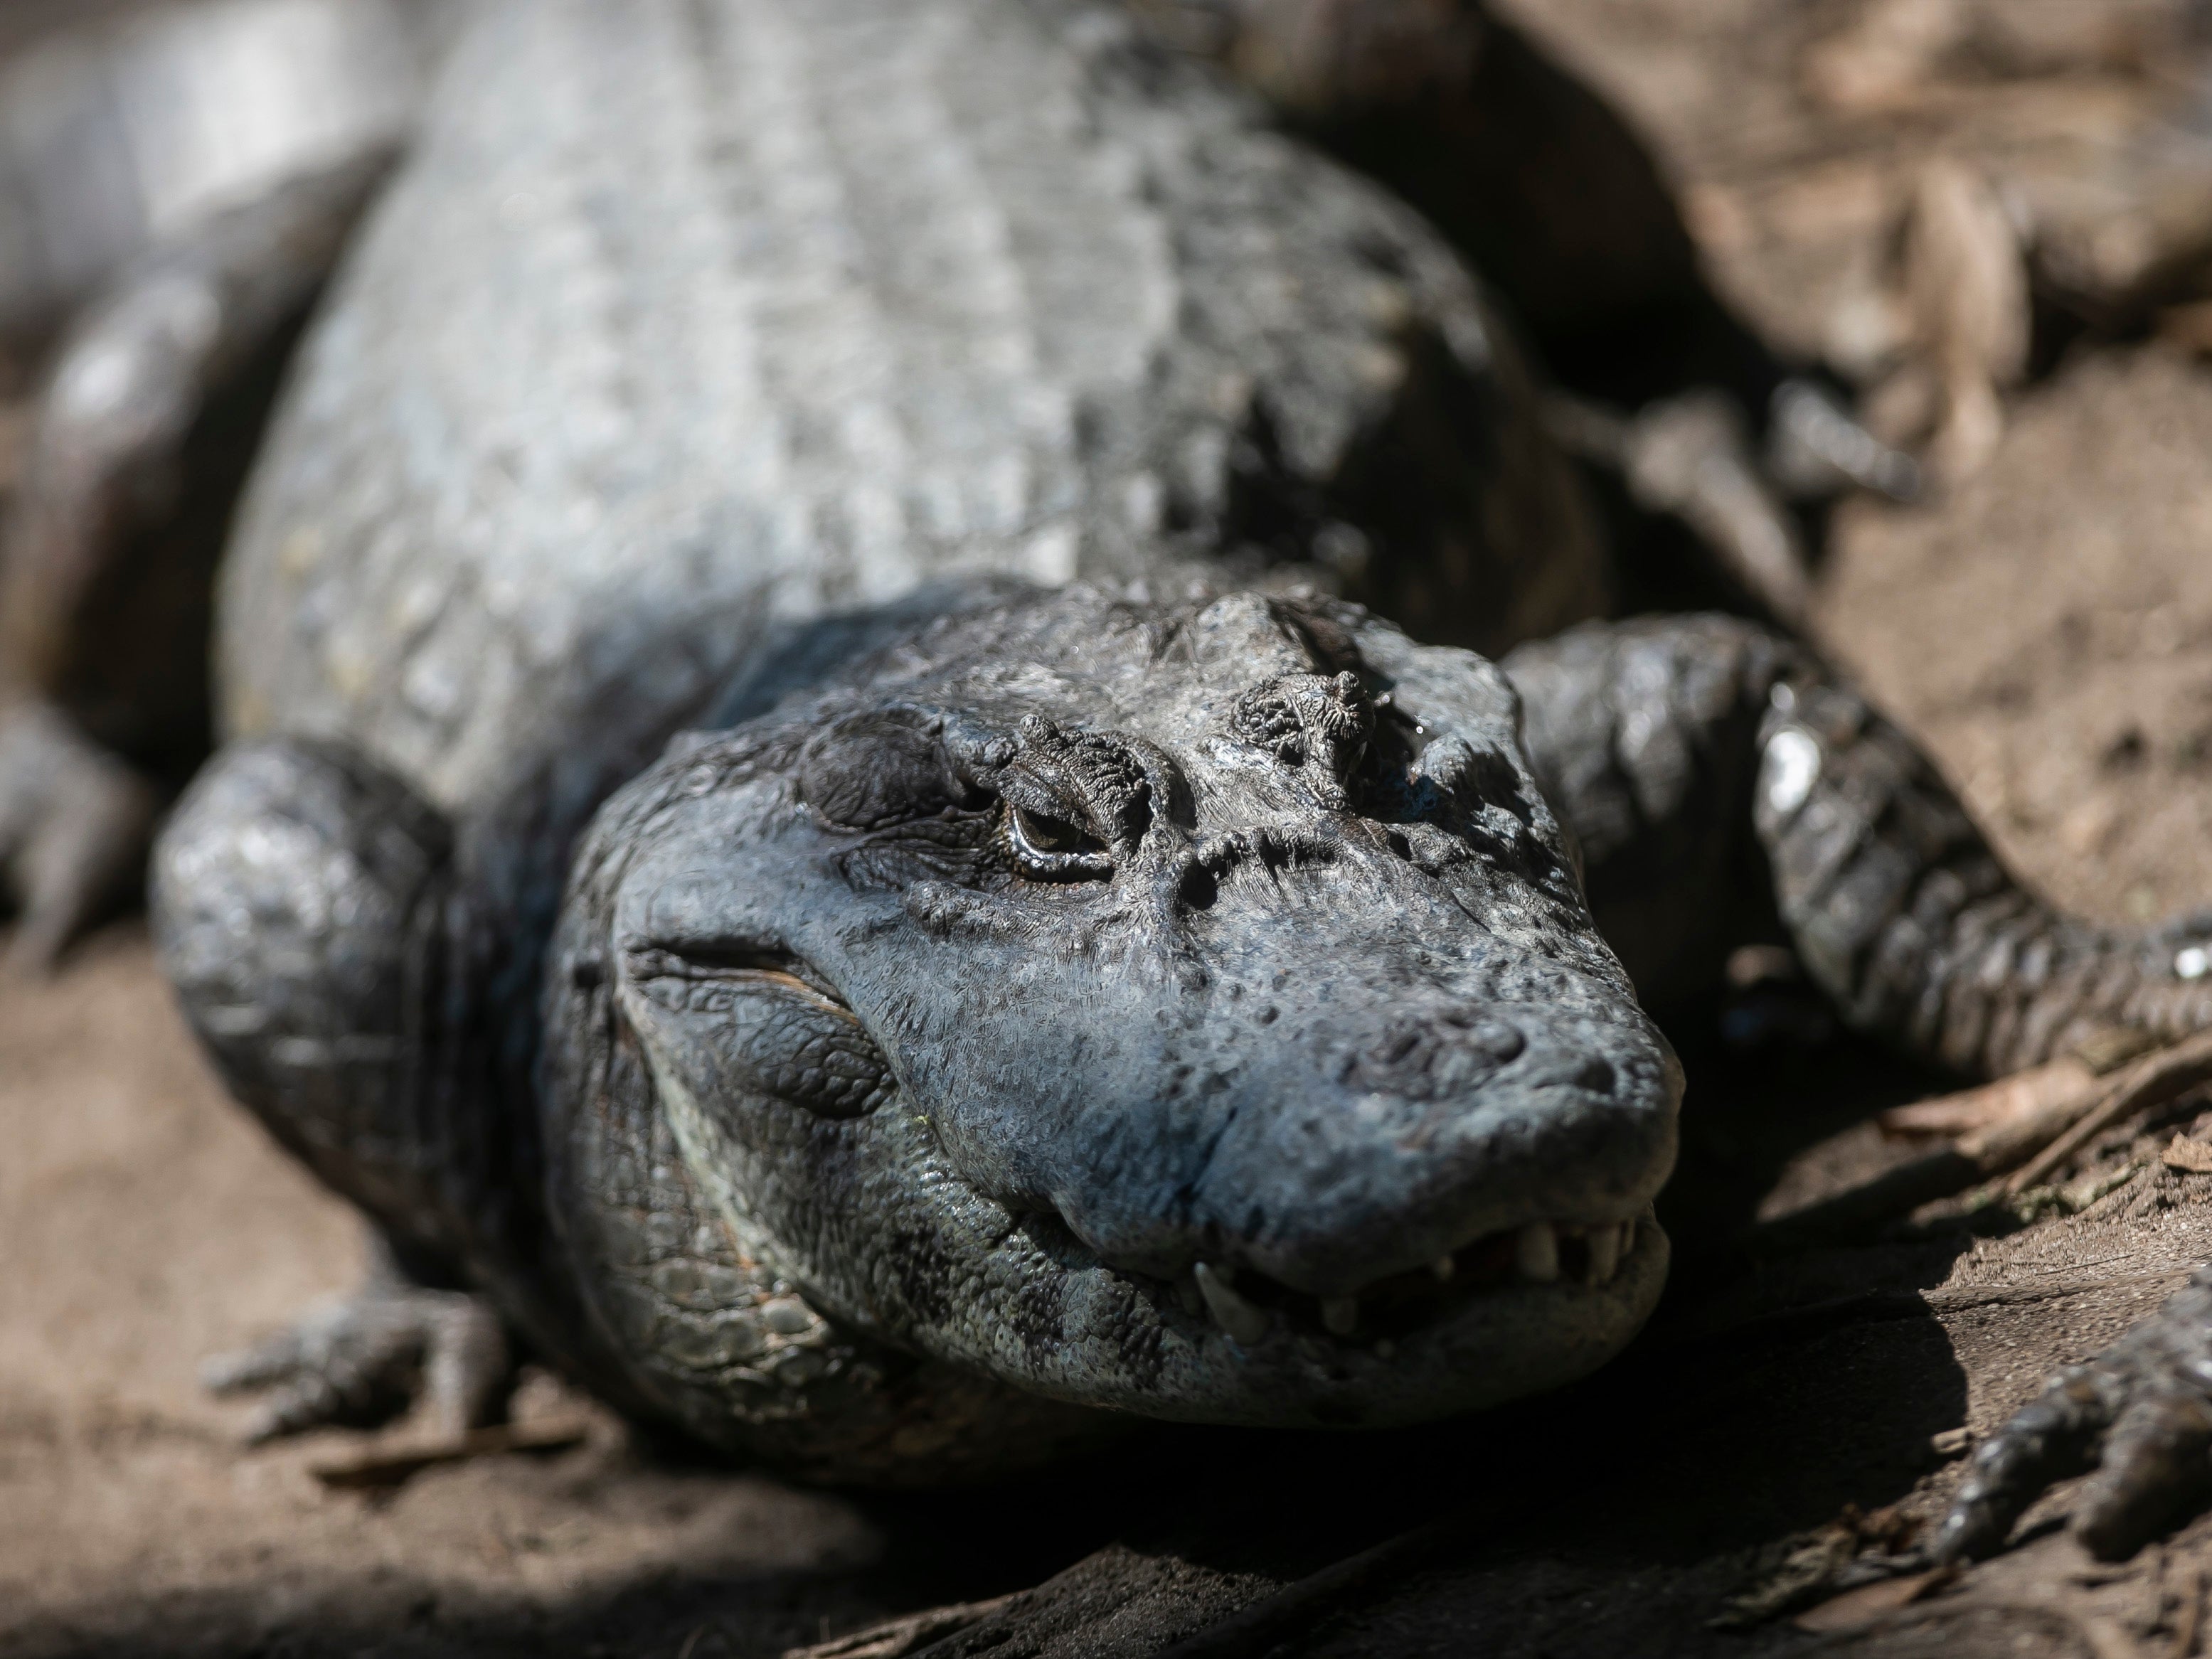 An alligator basks in the sun beside polluted water from a sub-basin of the Canal das Tachas